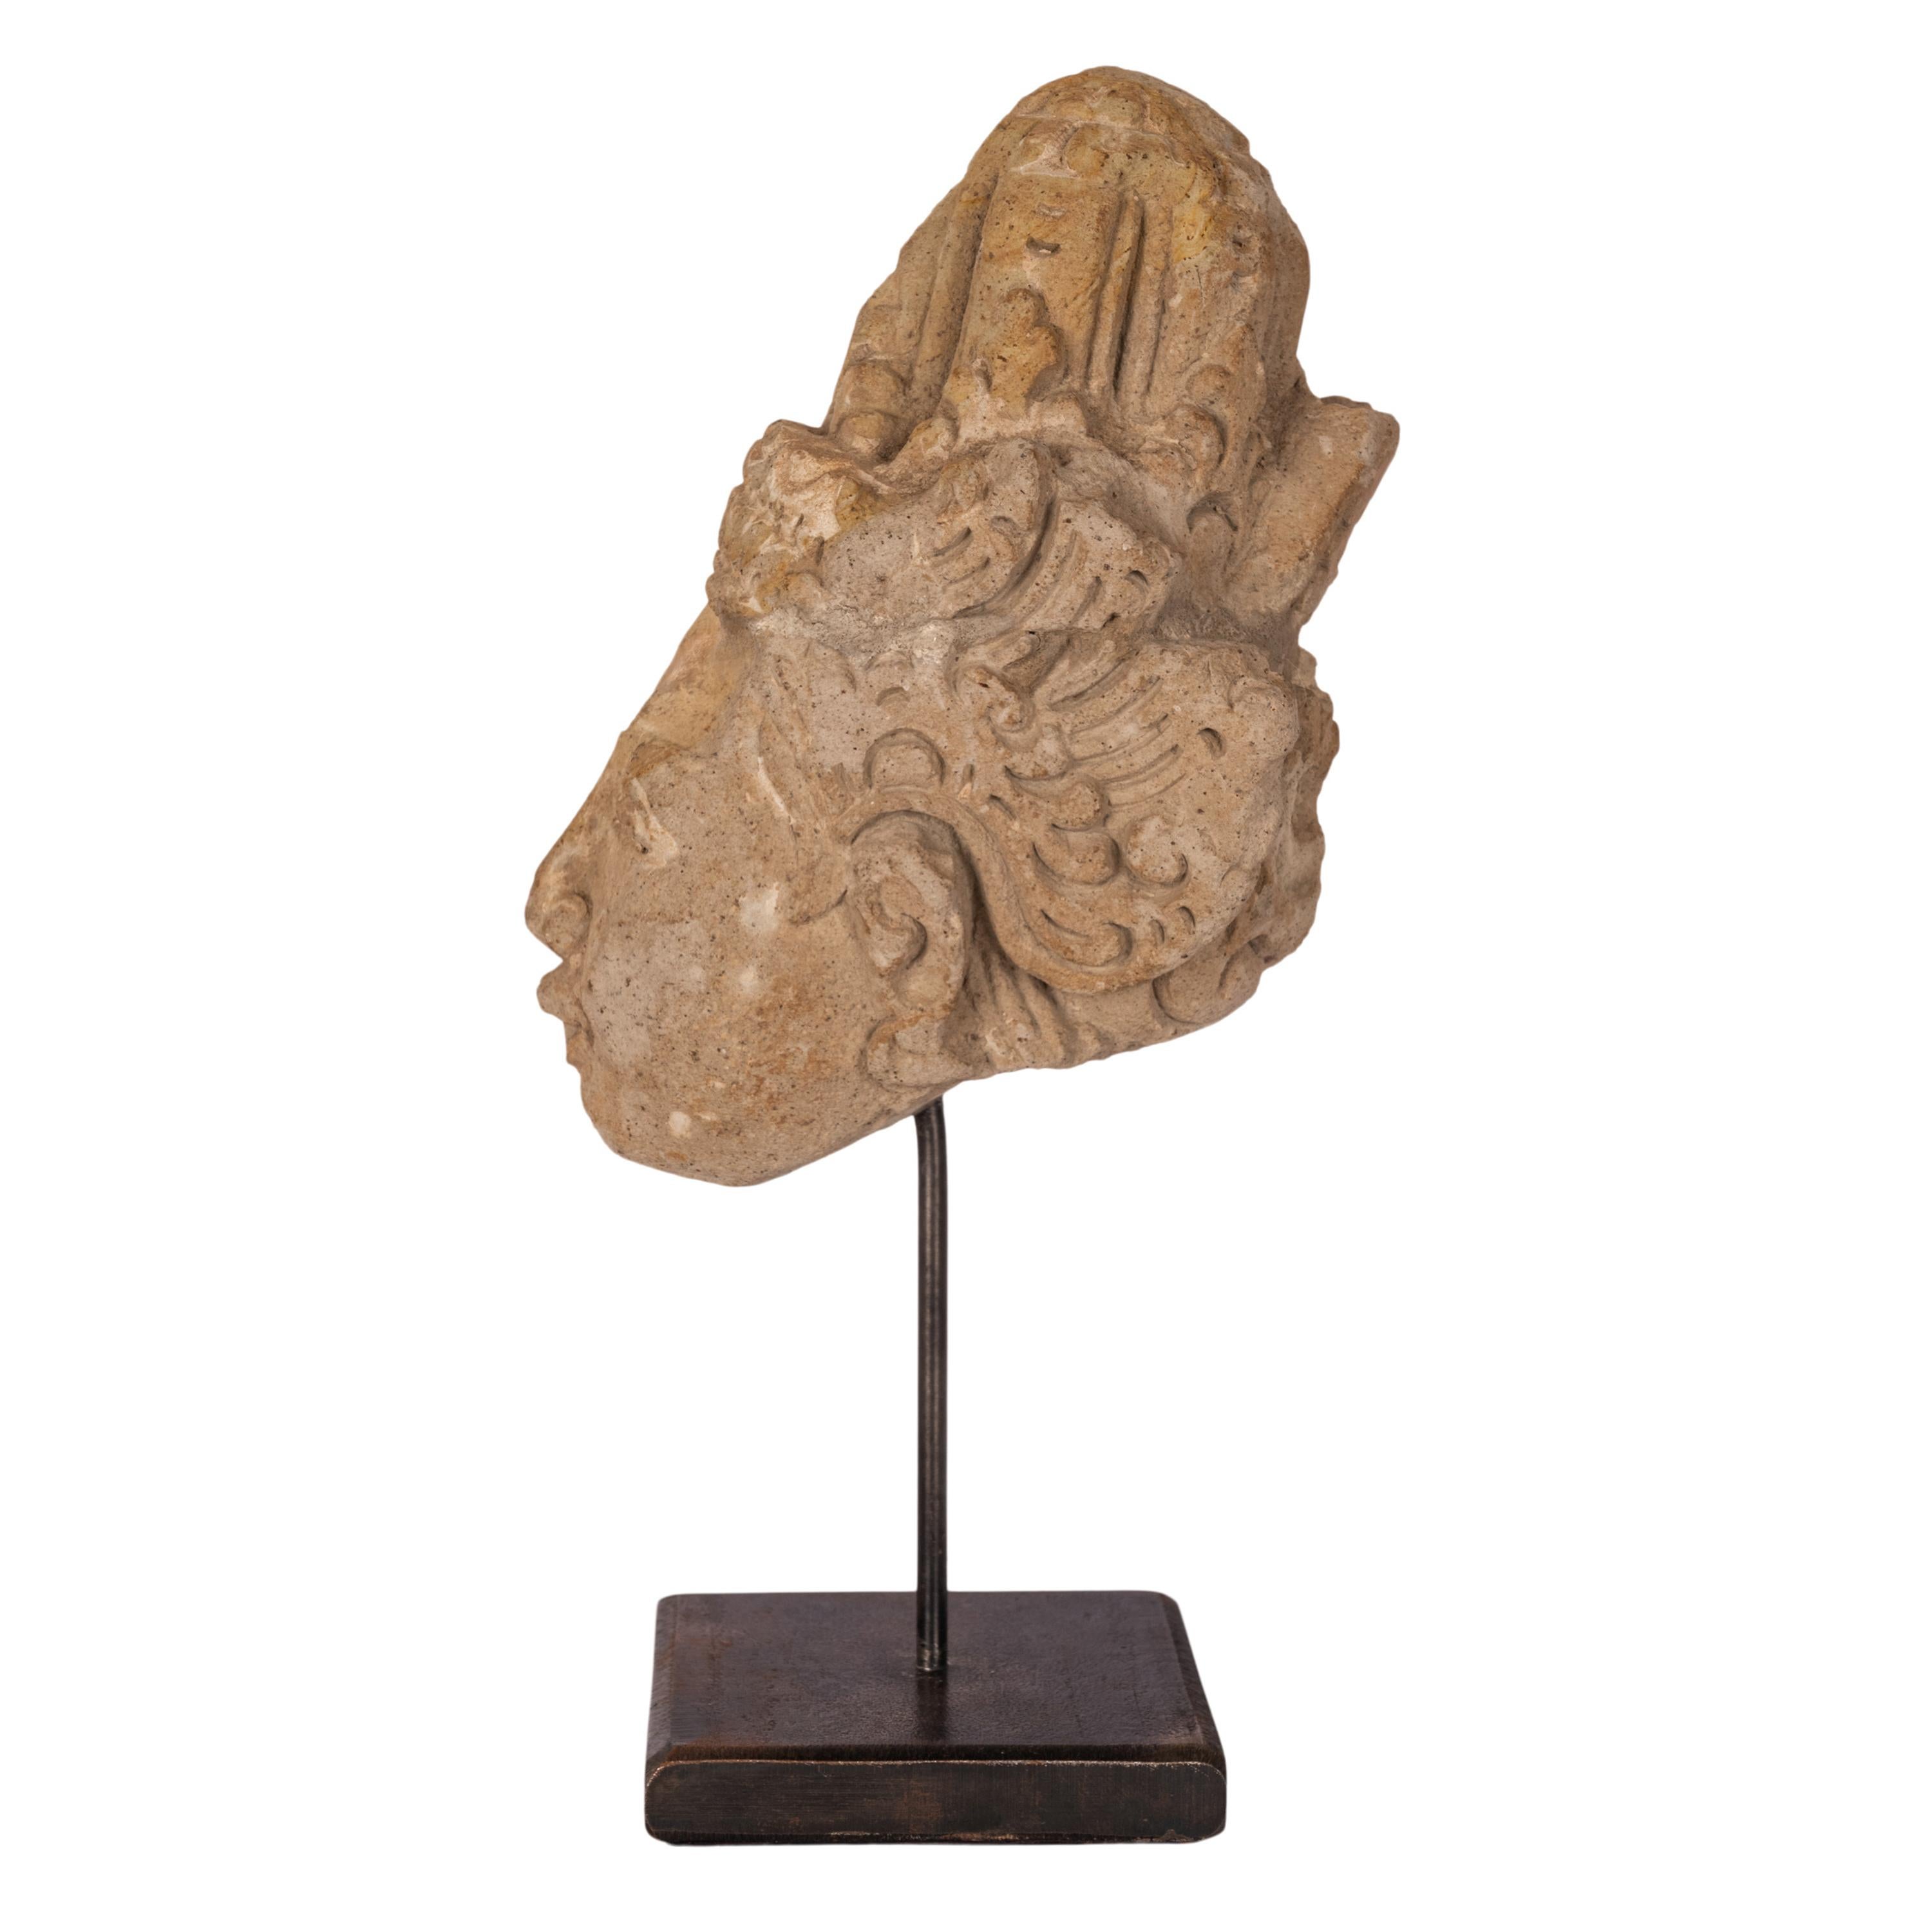 Archaistic Ancient Gandharan Carved Stucco Greco Buddhist Bodhisattva Head Bust 400-500 CE For Sale